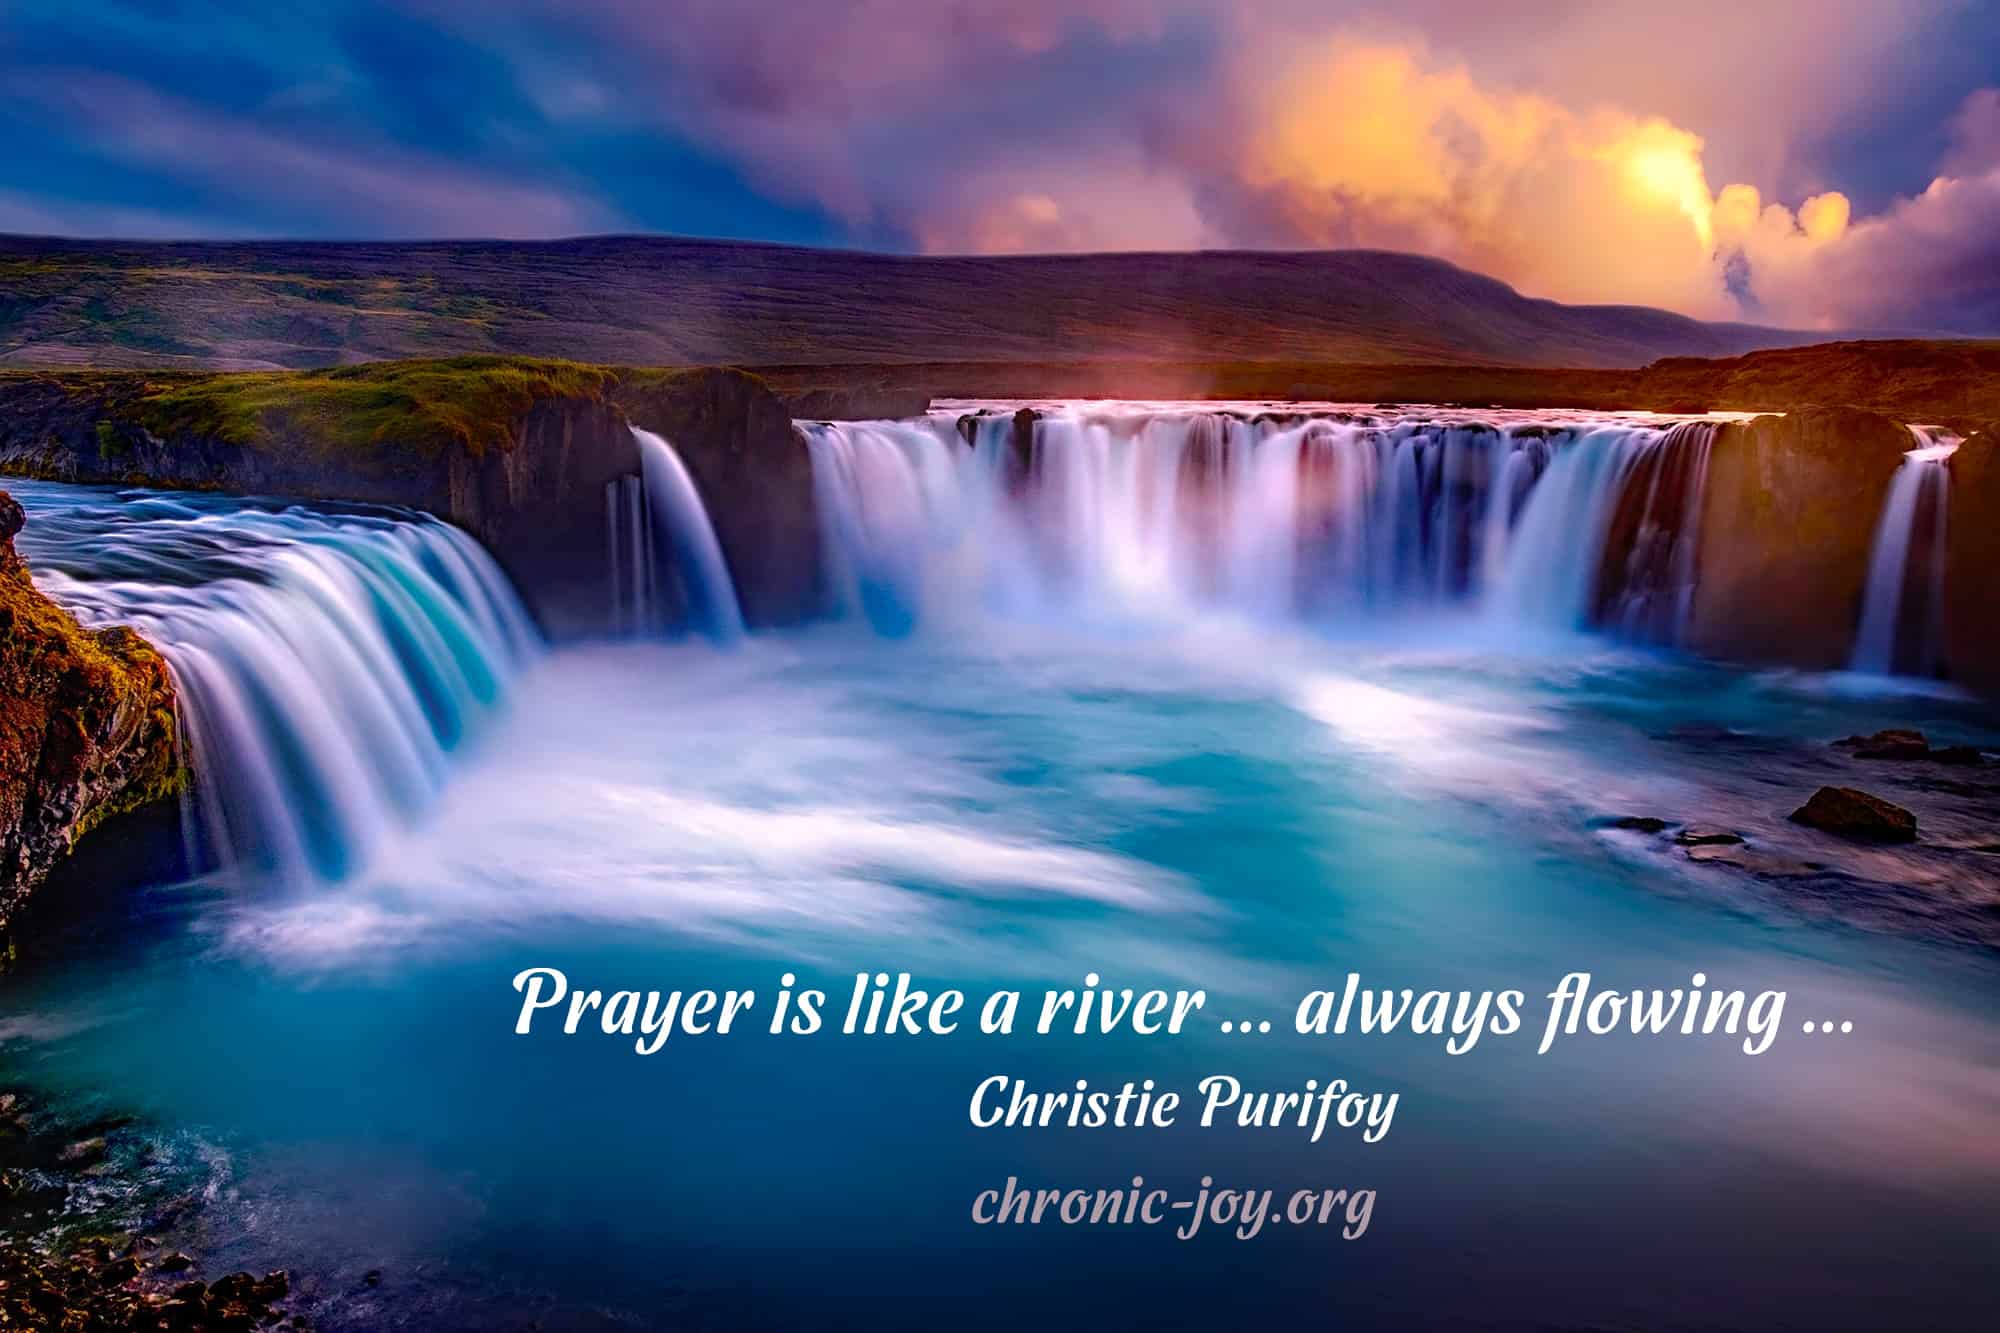 "Prayer is like a river ... always flowing ..." Christie Purifoy